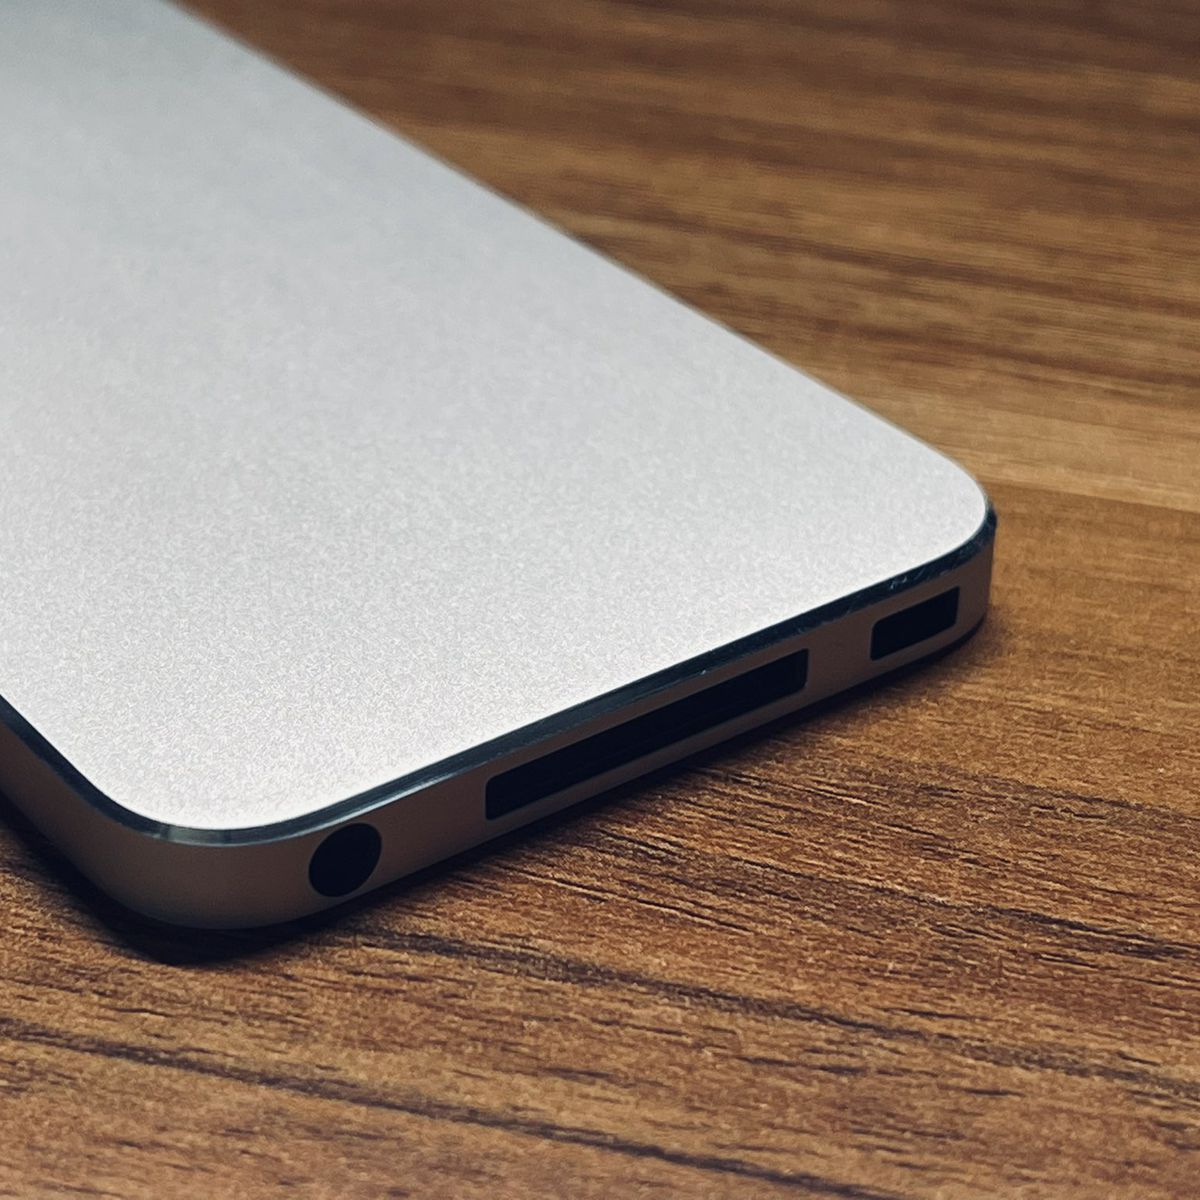 Unreleased iPod Touch 5 With Chamfered Edges and 30-Pin Dock